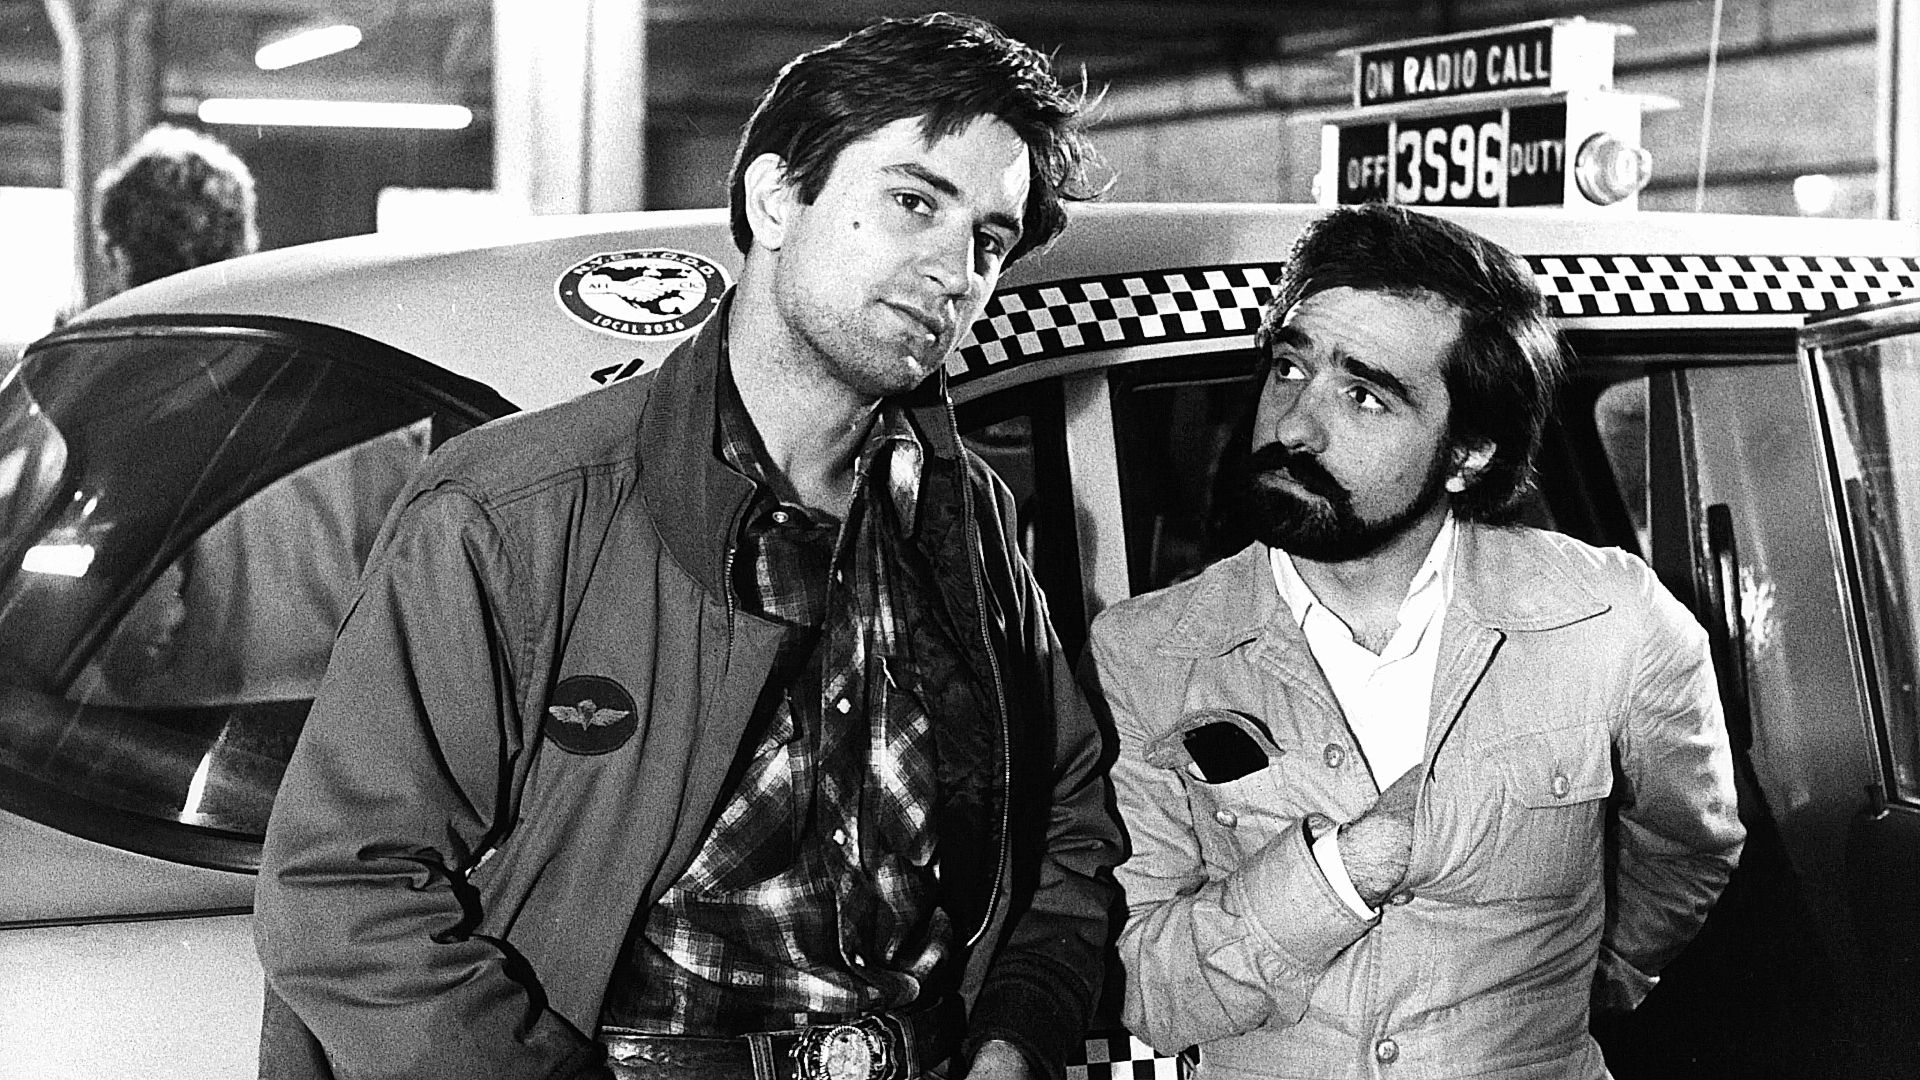 Robert De Niro (left) and Martin Scorsese (right) on the set of Taxi Driver